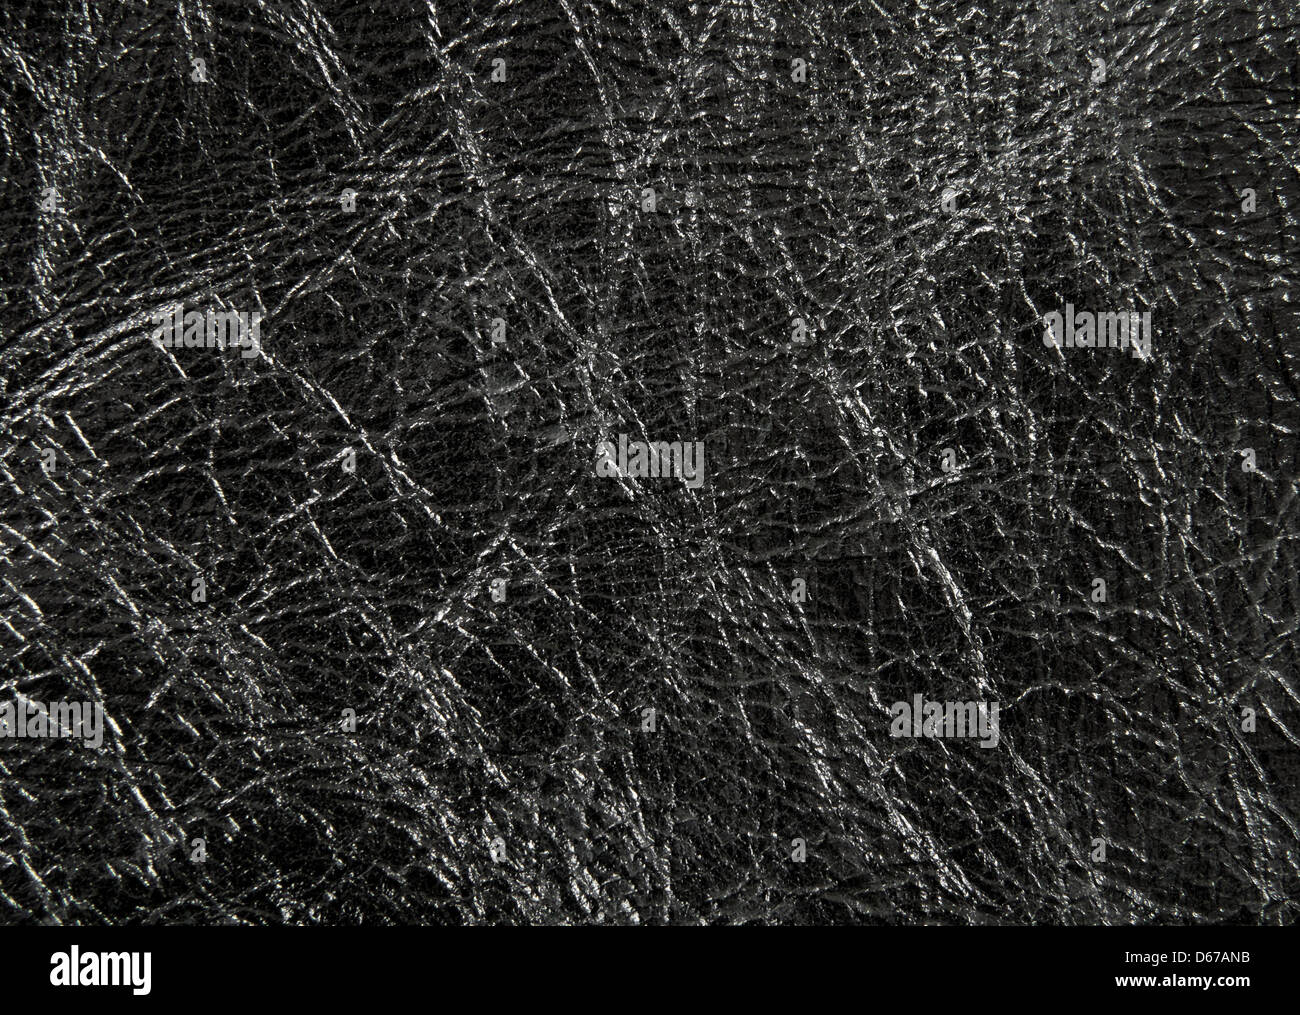 Closeup of shiny and wrinkled black leather texture. Stock Photo